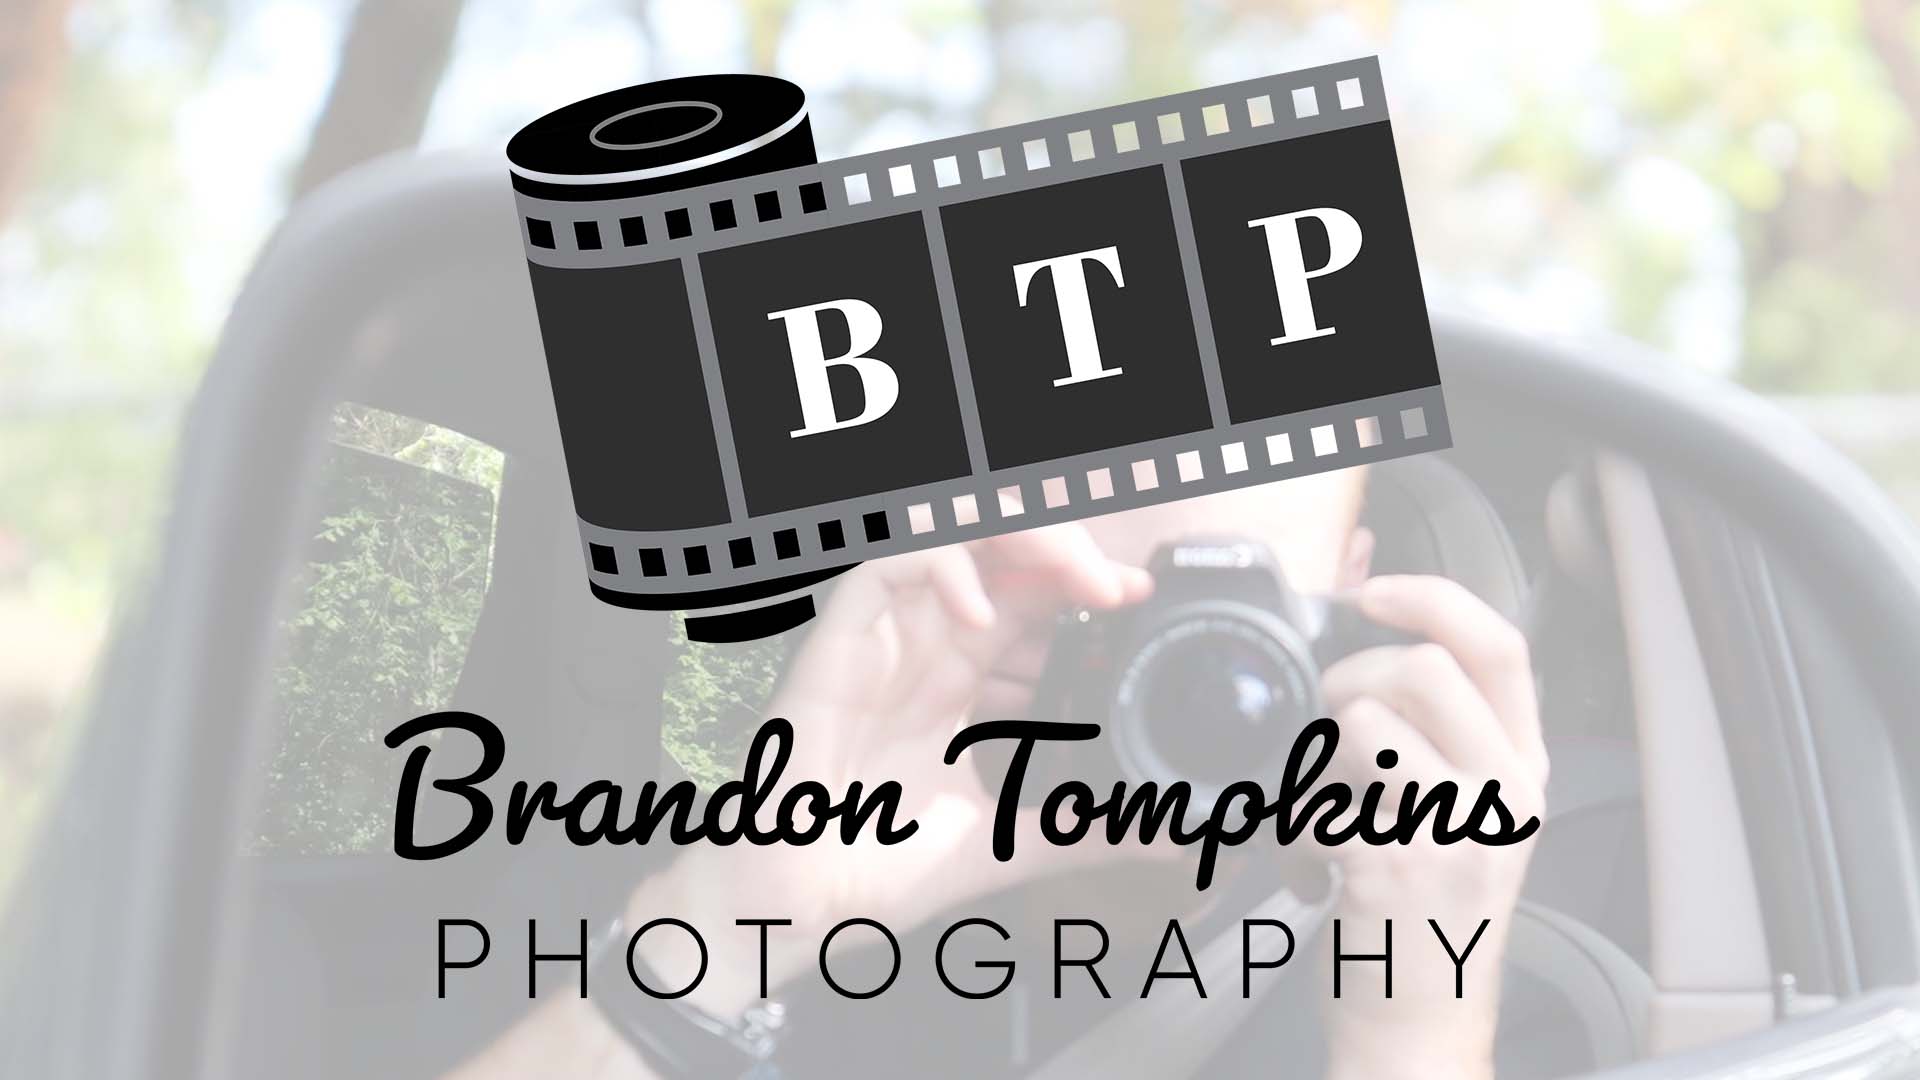 Film canister logo with the letters B T P Brandon Tompkins Photography